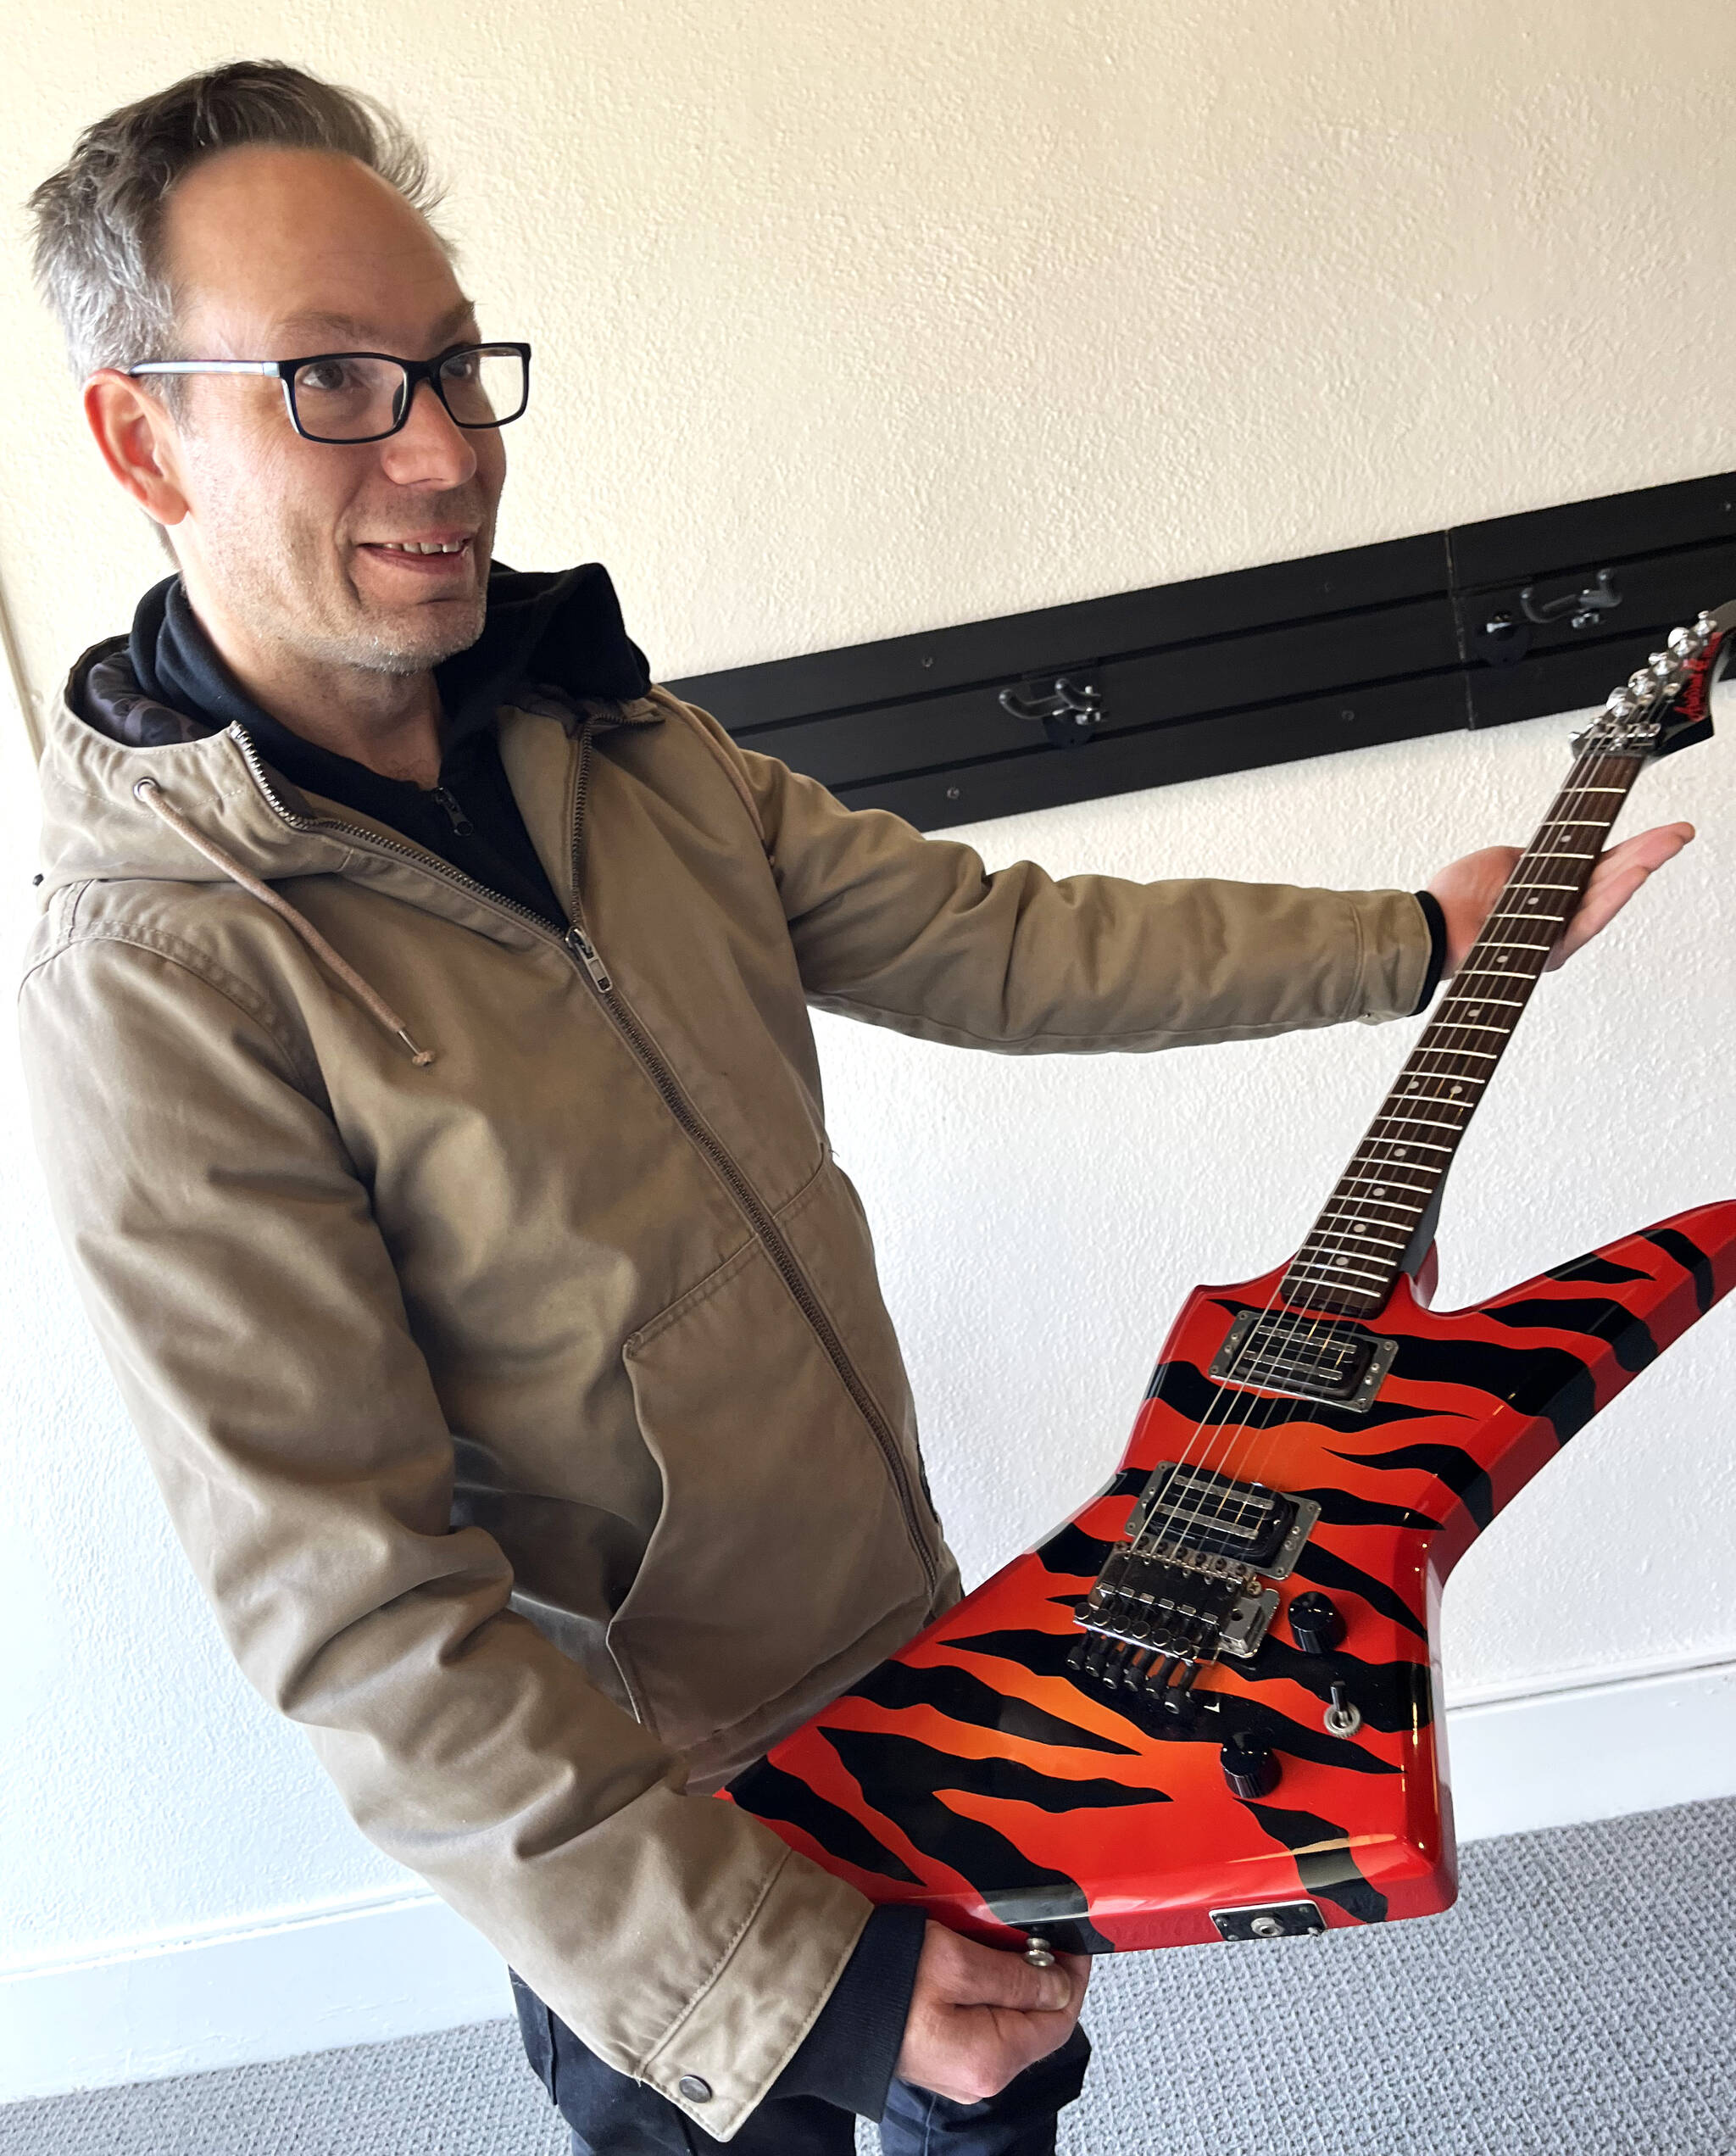 Joe Backus, co-owner of Guitar Galactica, shows off one of the funky guitars hes collected through more than 30 years. This striking tiger-striped Aria Pro II, from Japan, stood out visually on Wednesday when The Daily World spoke to Backus and his business partner Ron Harless. The shop  204 S. K St.,  should open in April. Backus and Harless, who have decades of music store experience in Seattle, cant wait to get started in downtown Aberdeen.